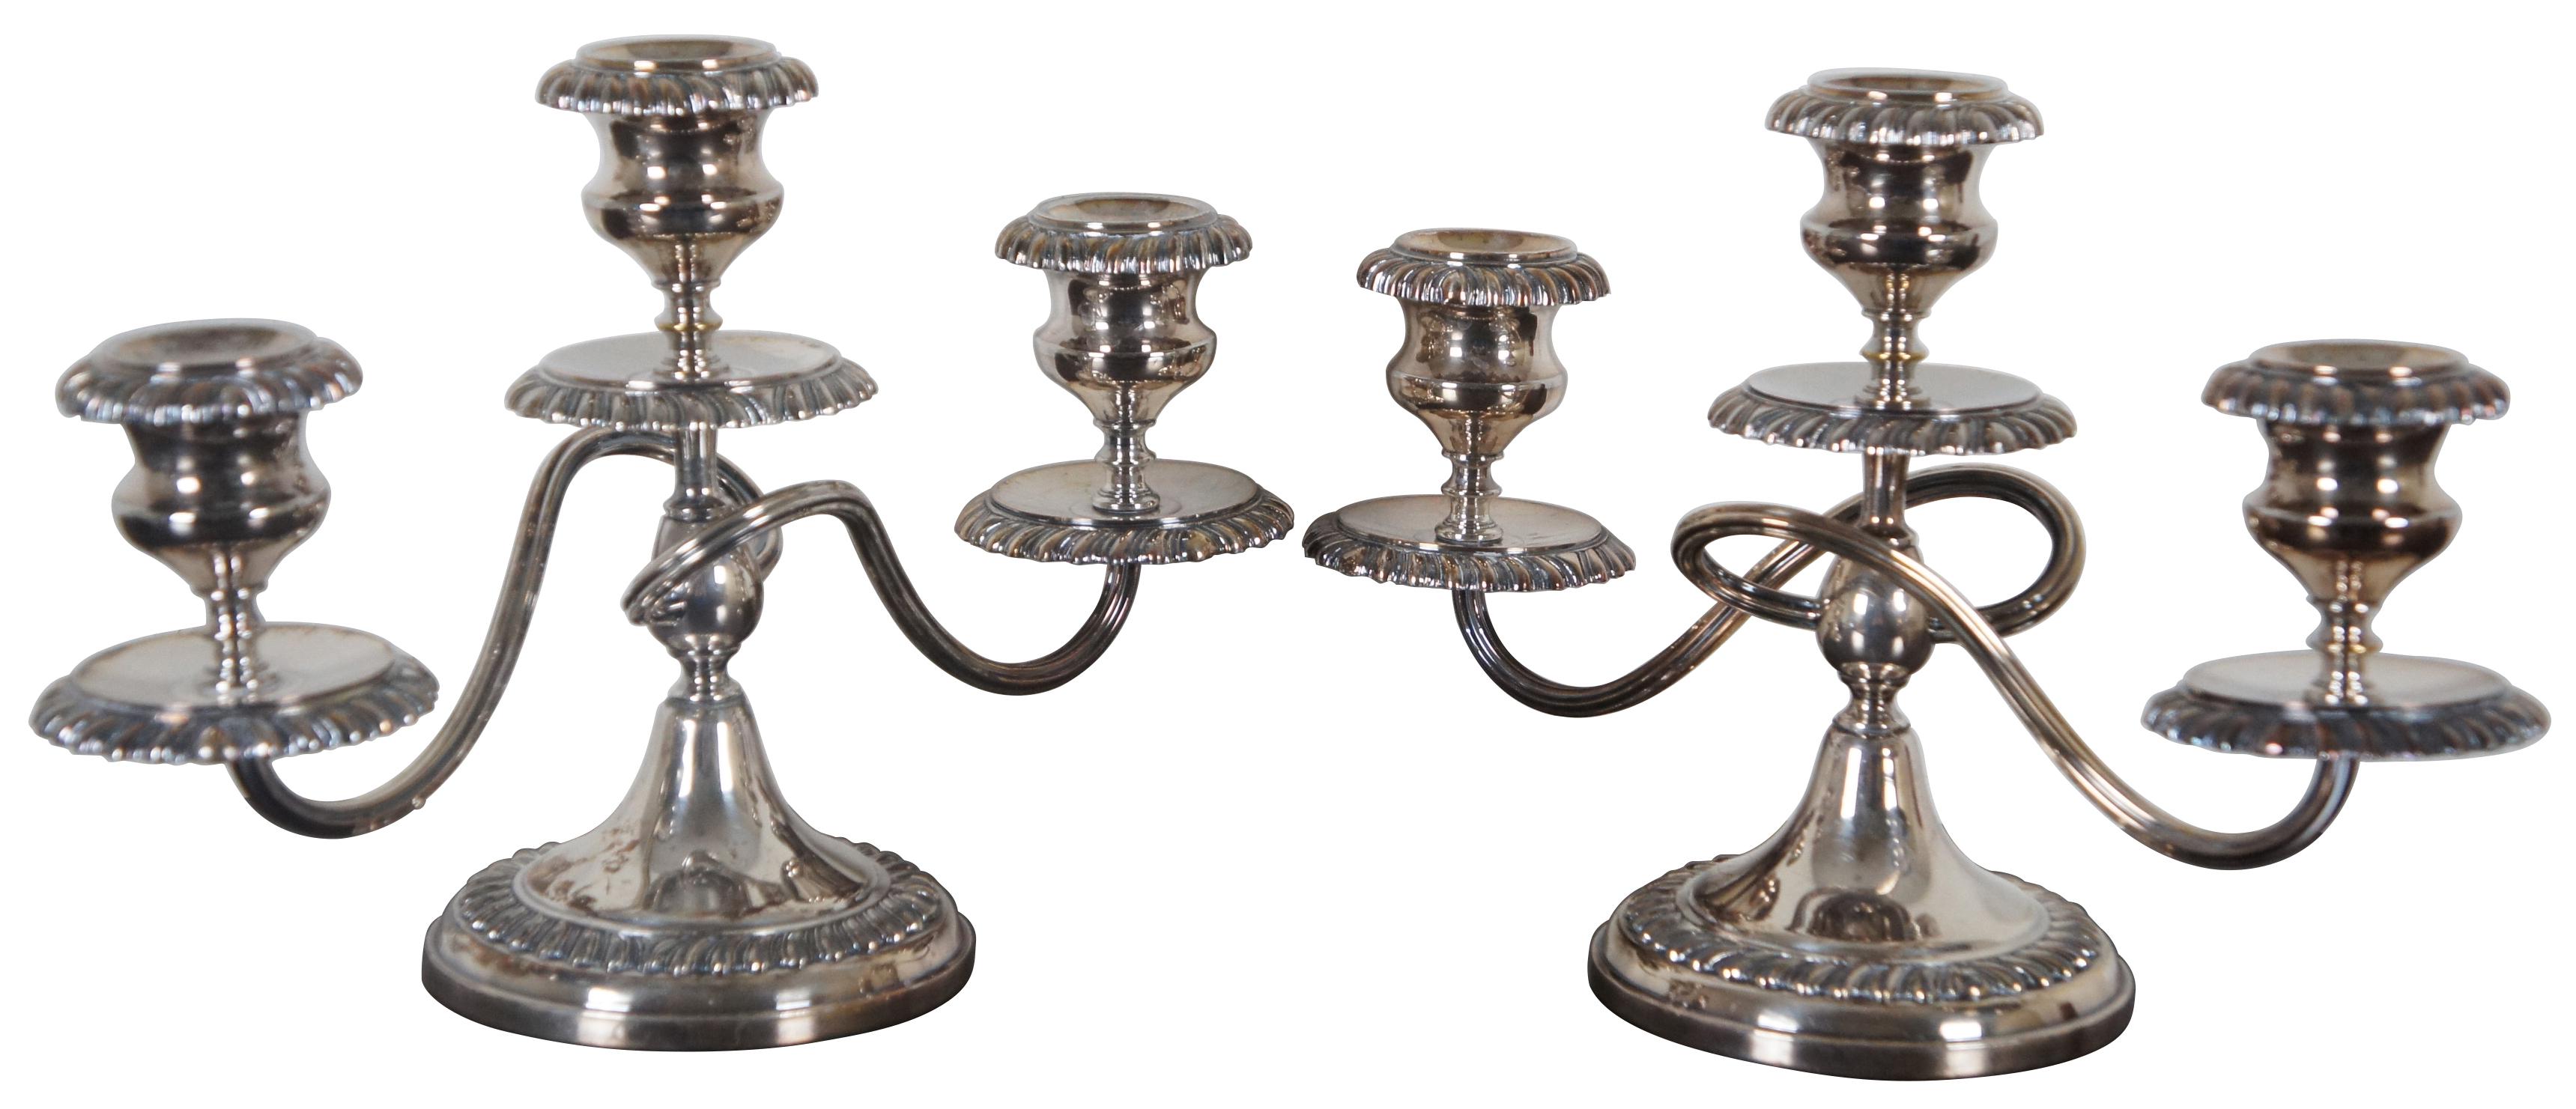 Pair of antique art nouveau style candelabras by Crescent Silverware Manufacturing Company.
     